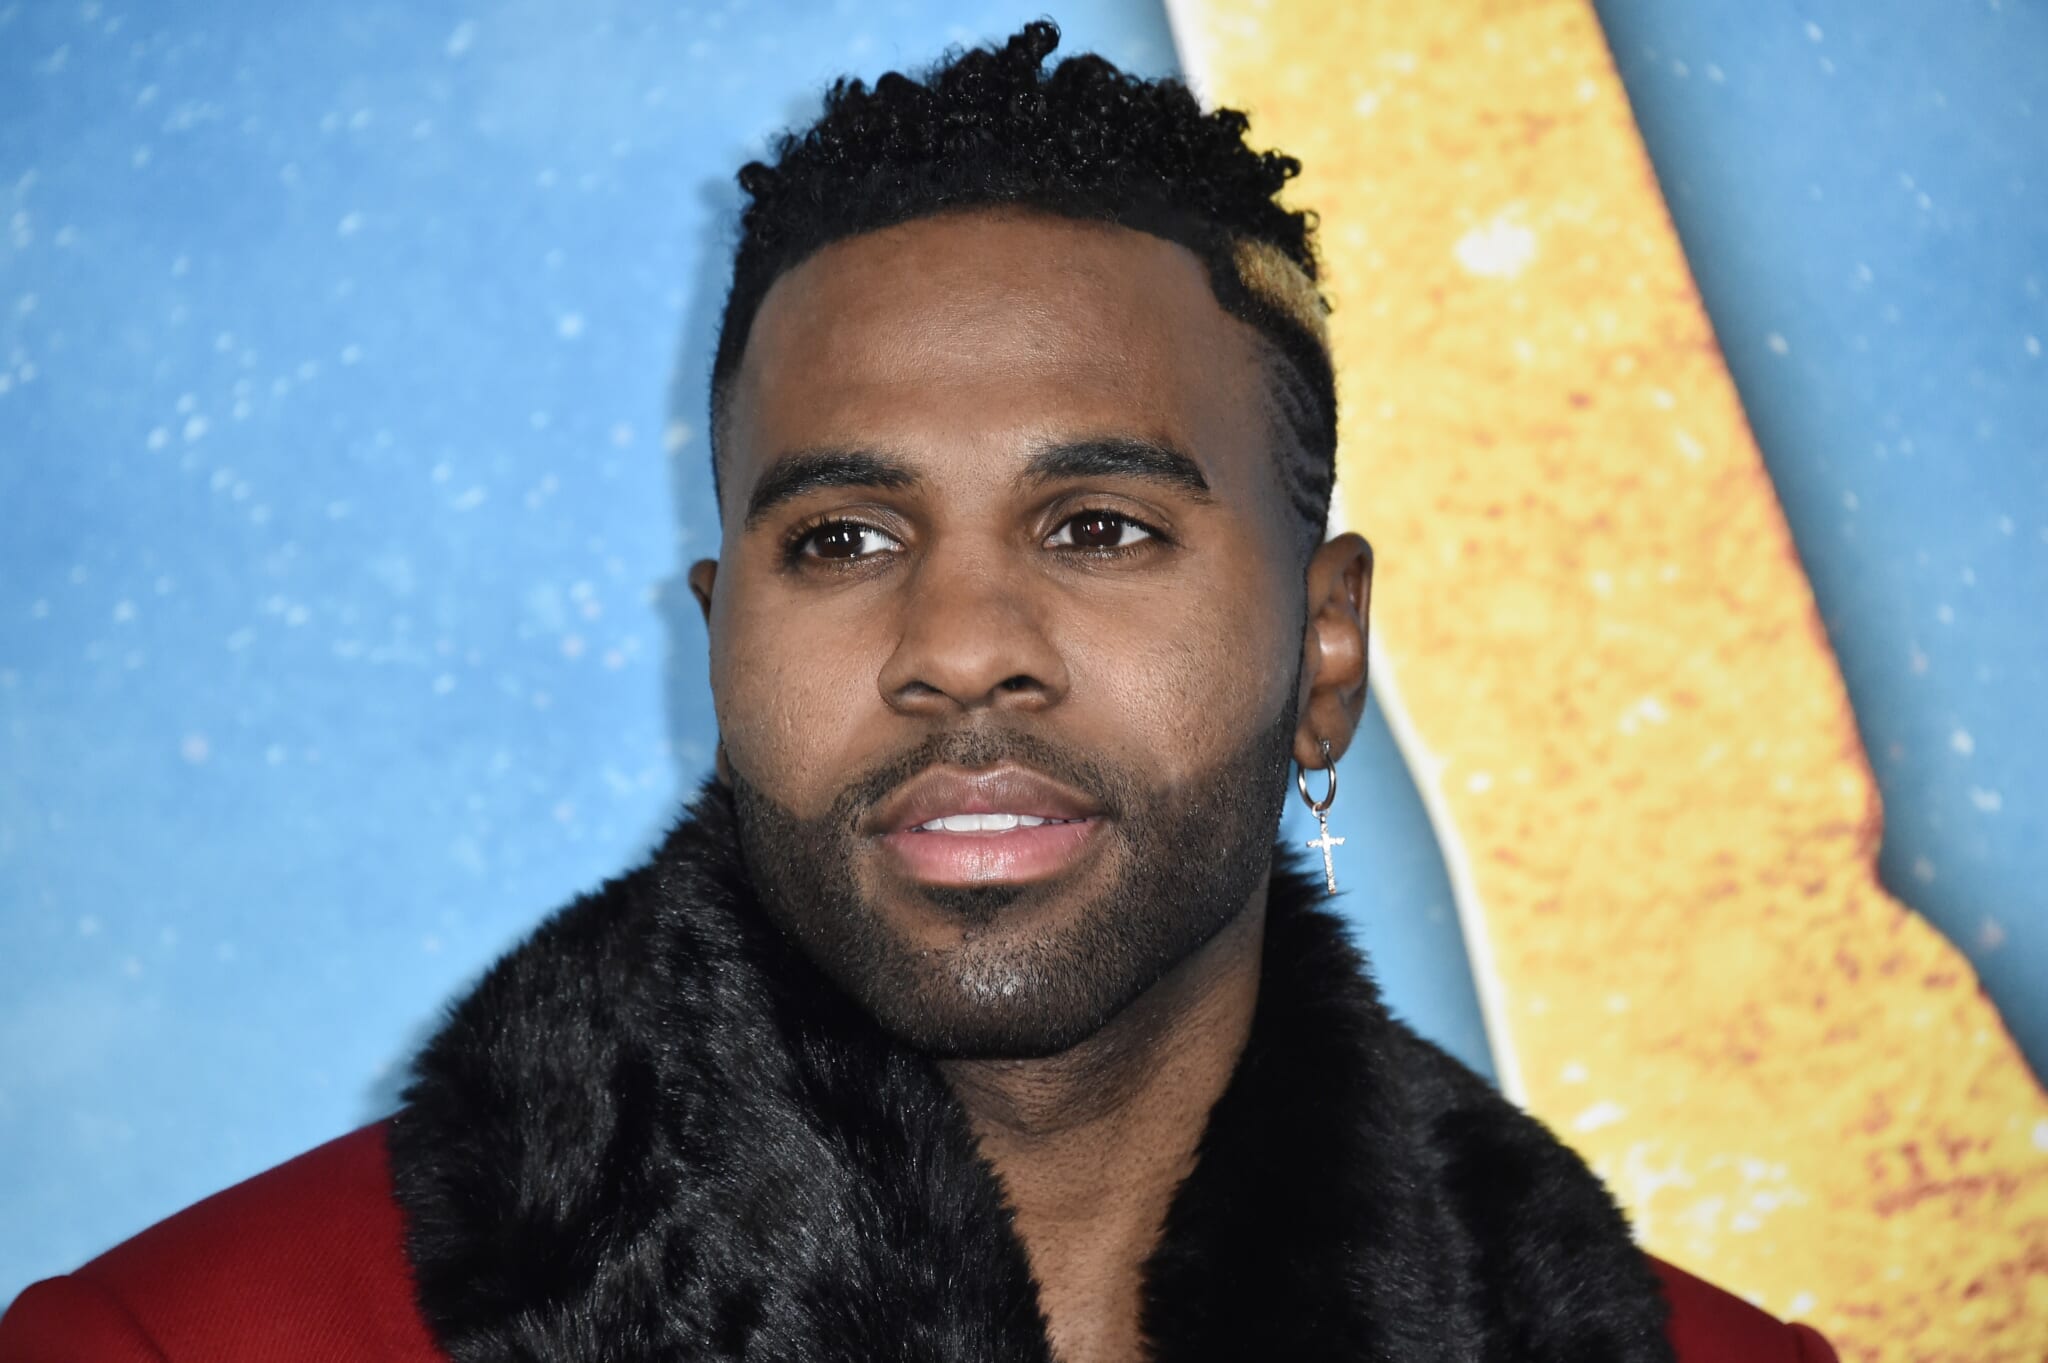 Jason Derulo fights two men in Las Vegas after being called ‘Usher’